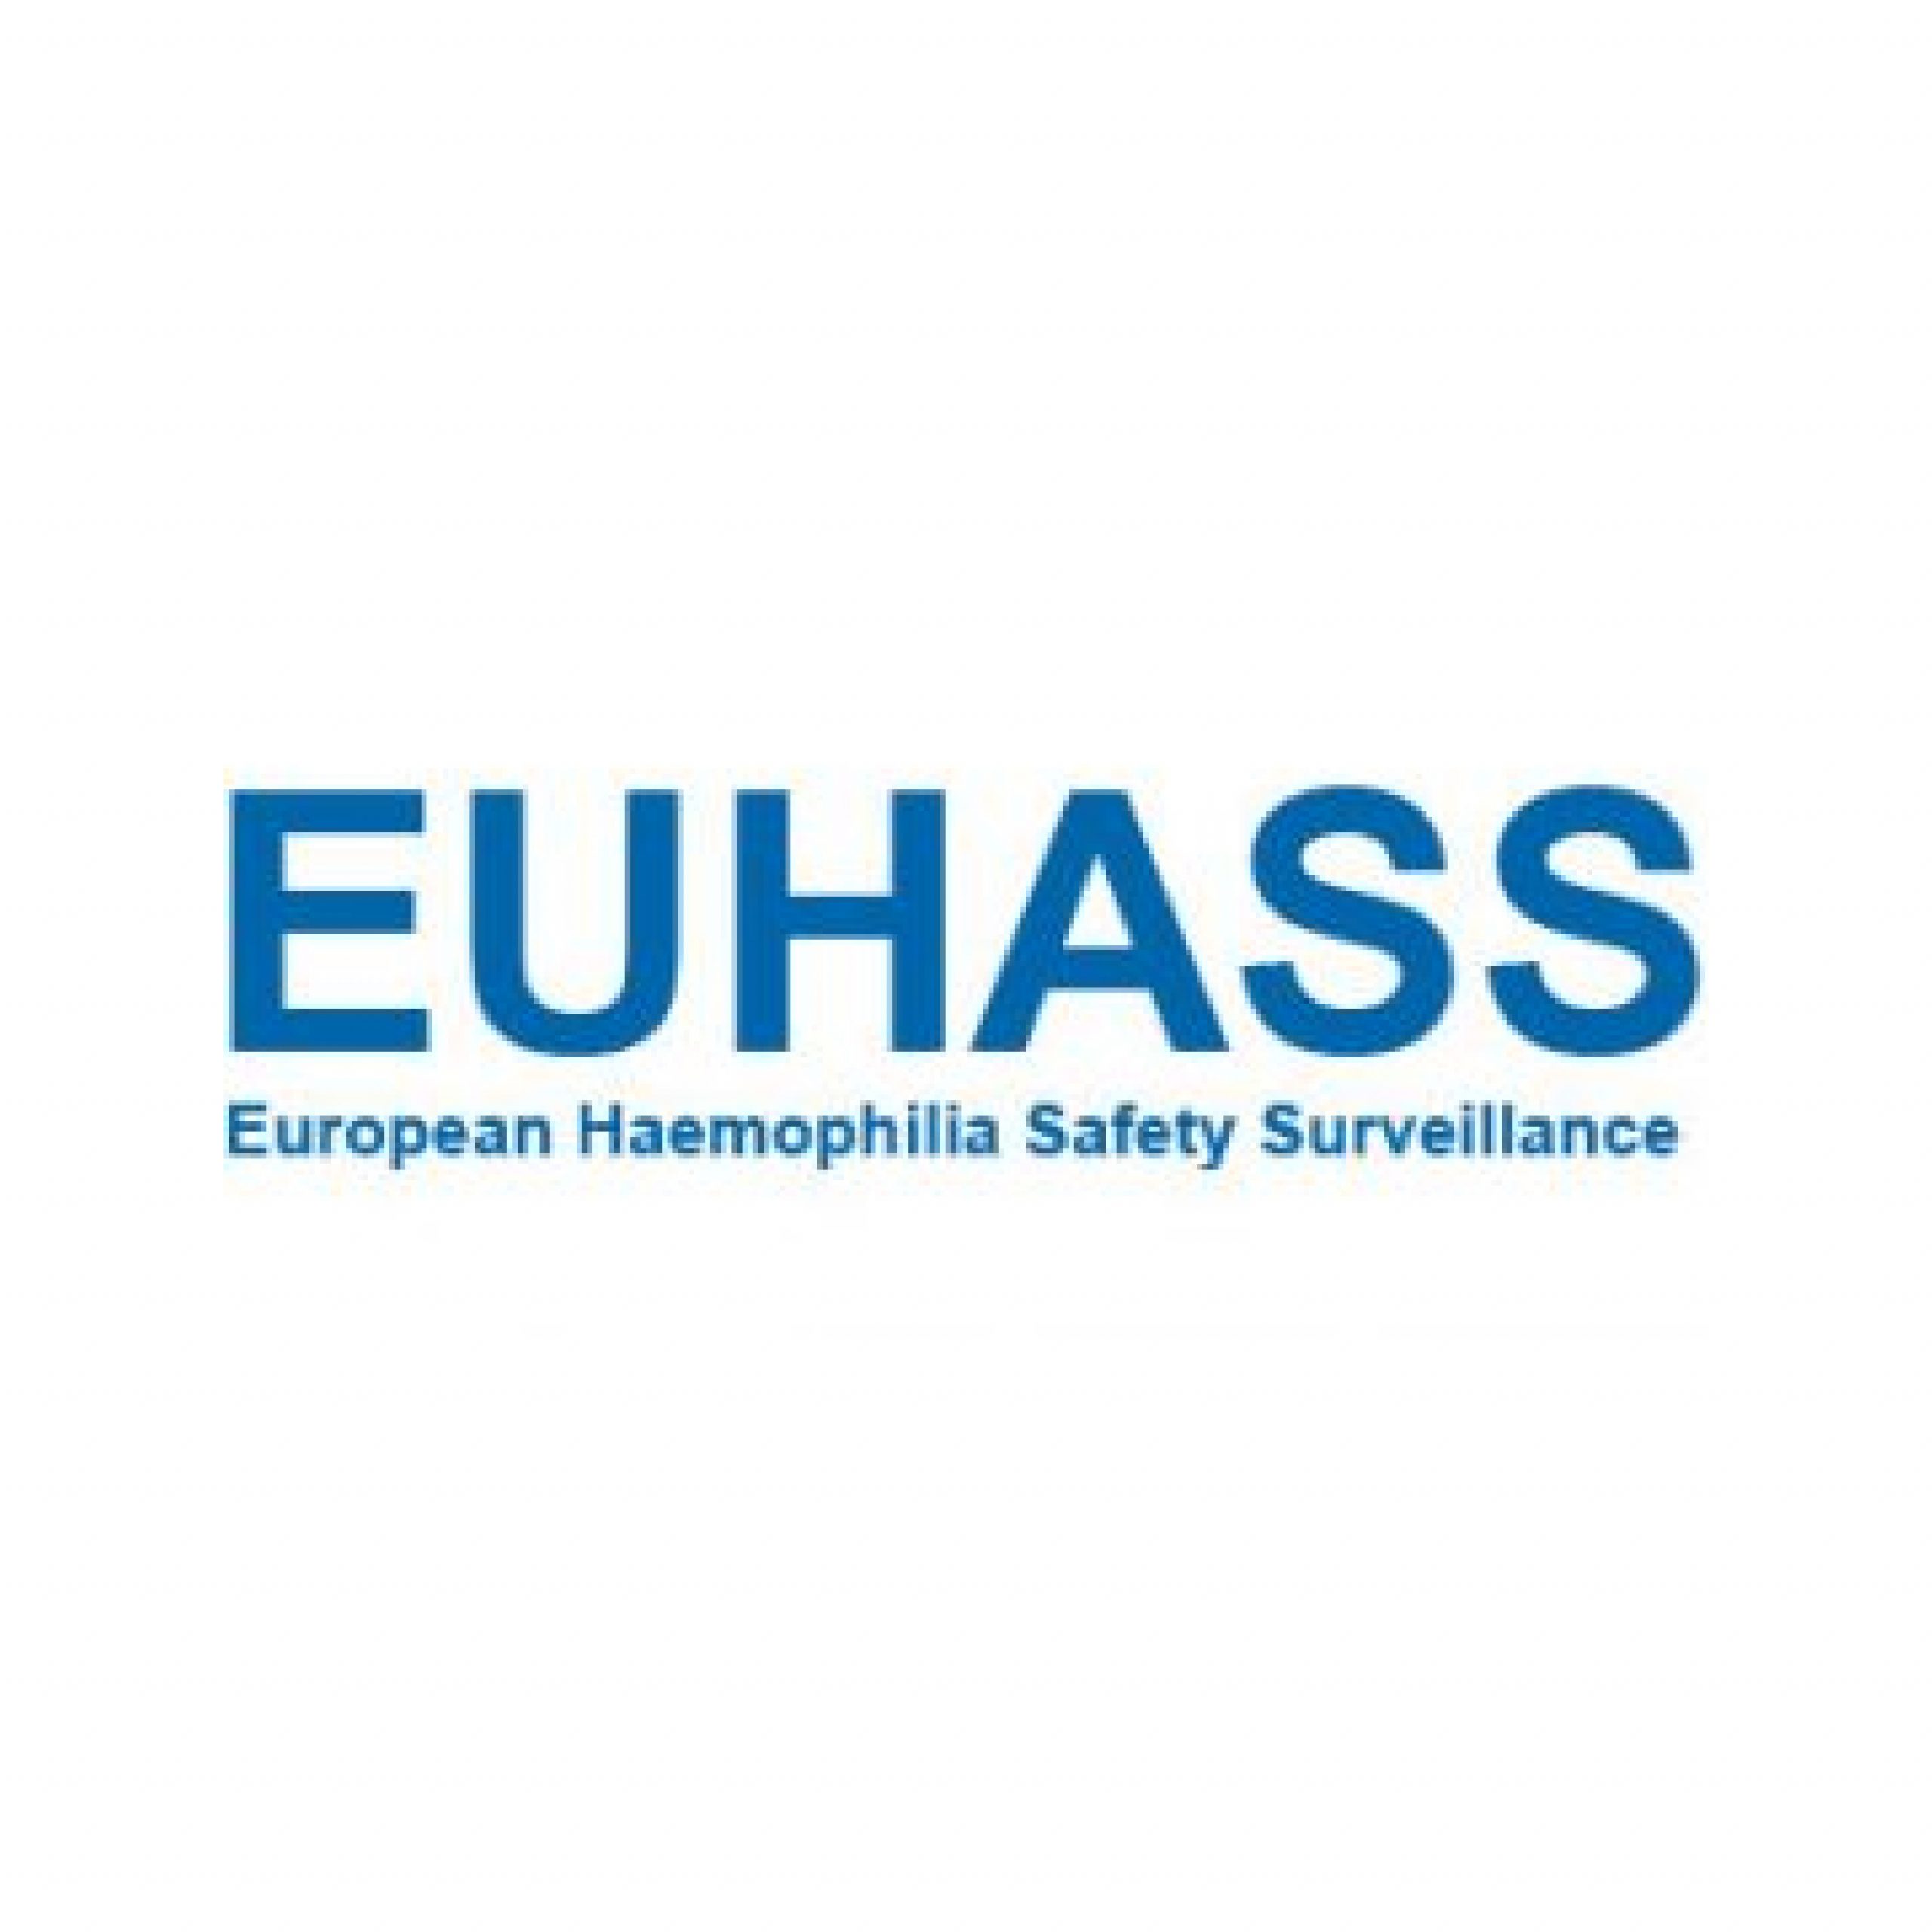 EUHASS is a pharmacovigilance program to monitor the safety of treatments for people with inherited bleeding disorders in Europe.